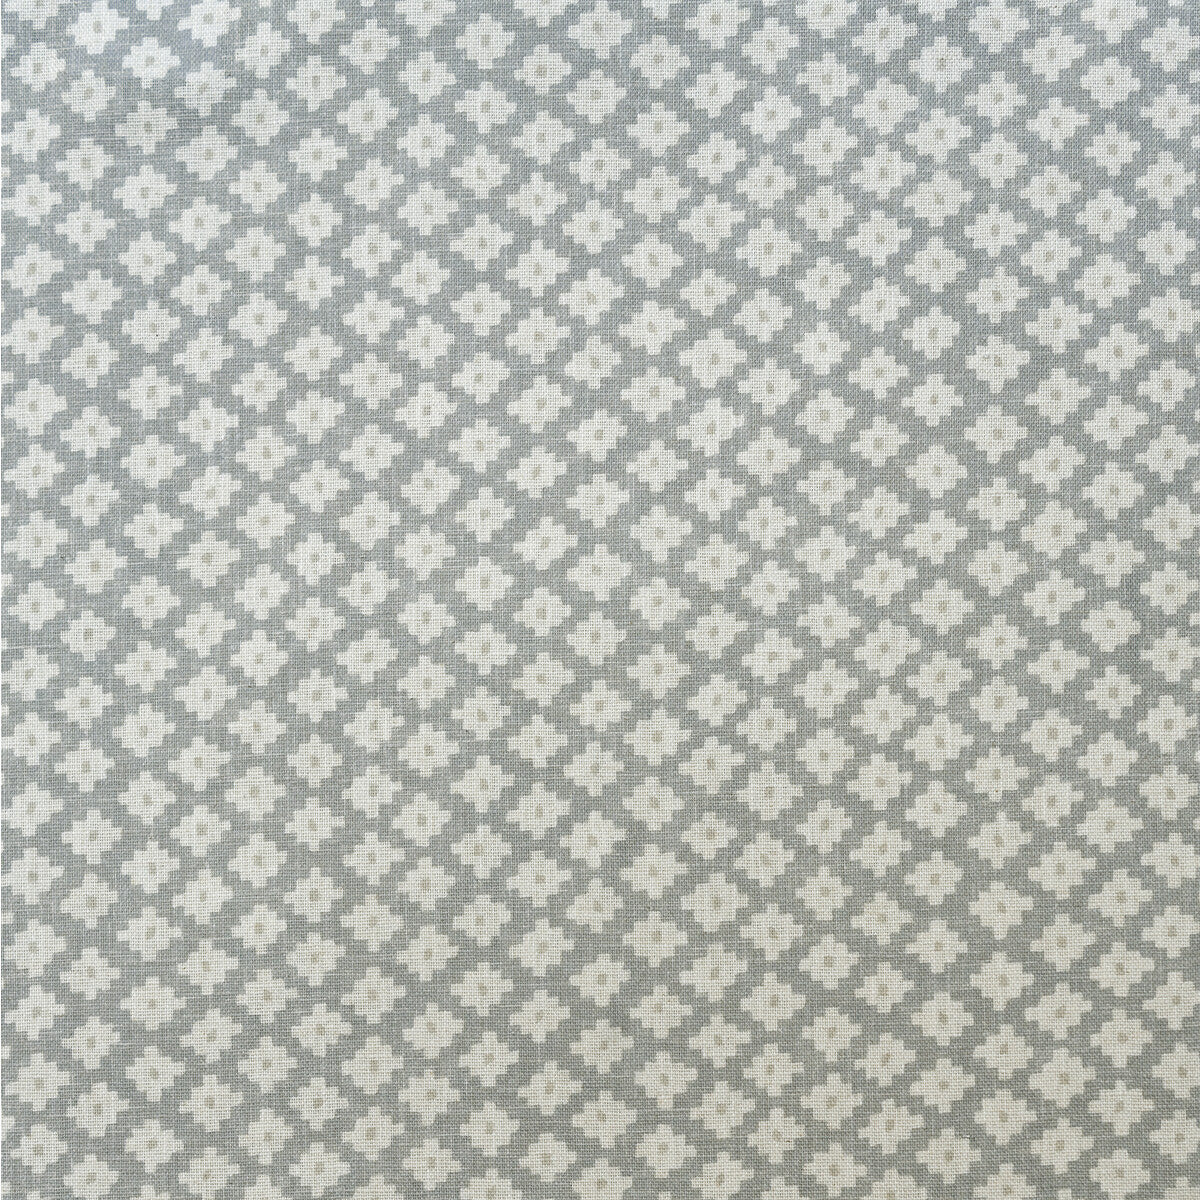 Maze fabric in cloud color - pattern AM100381.11.0 - by Kravet Couture in the Andrew Martin Garden Path collection